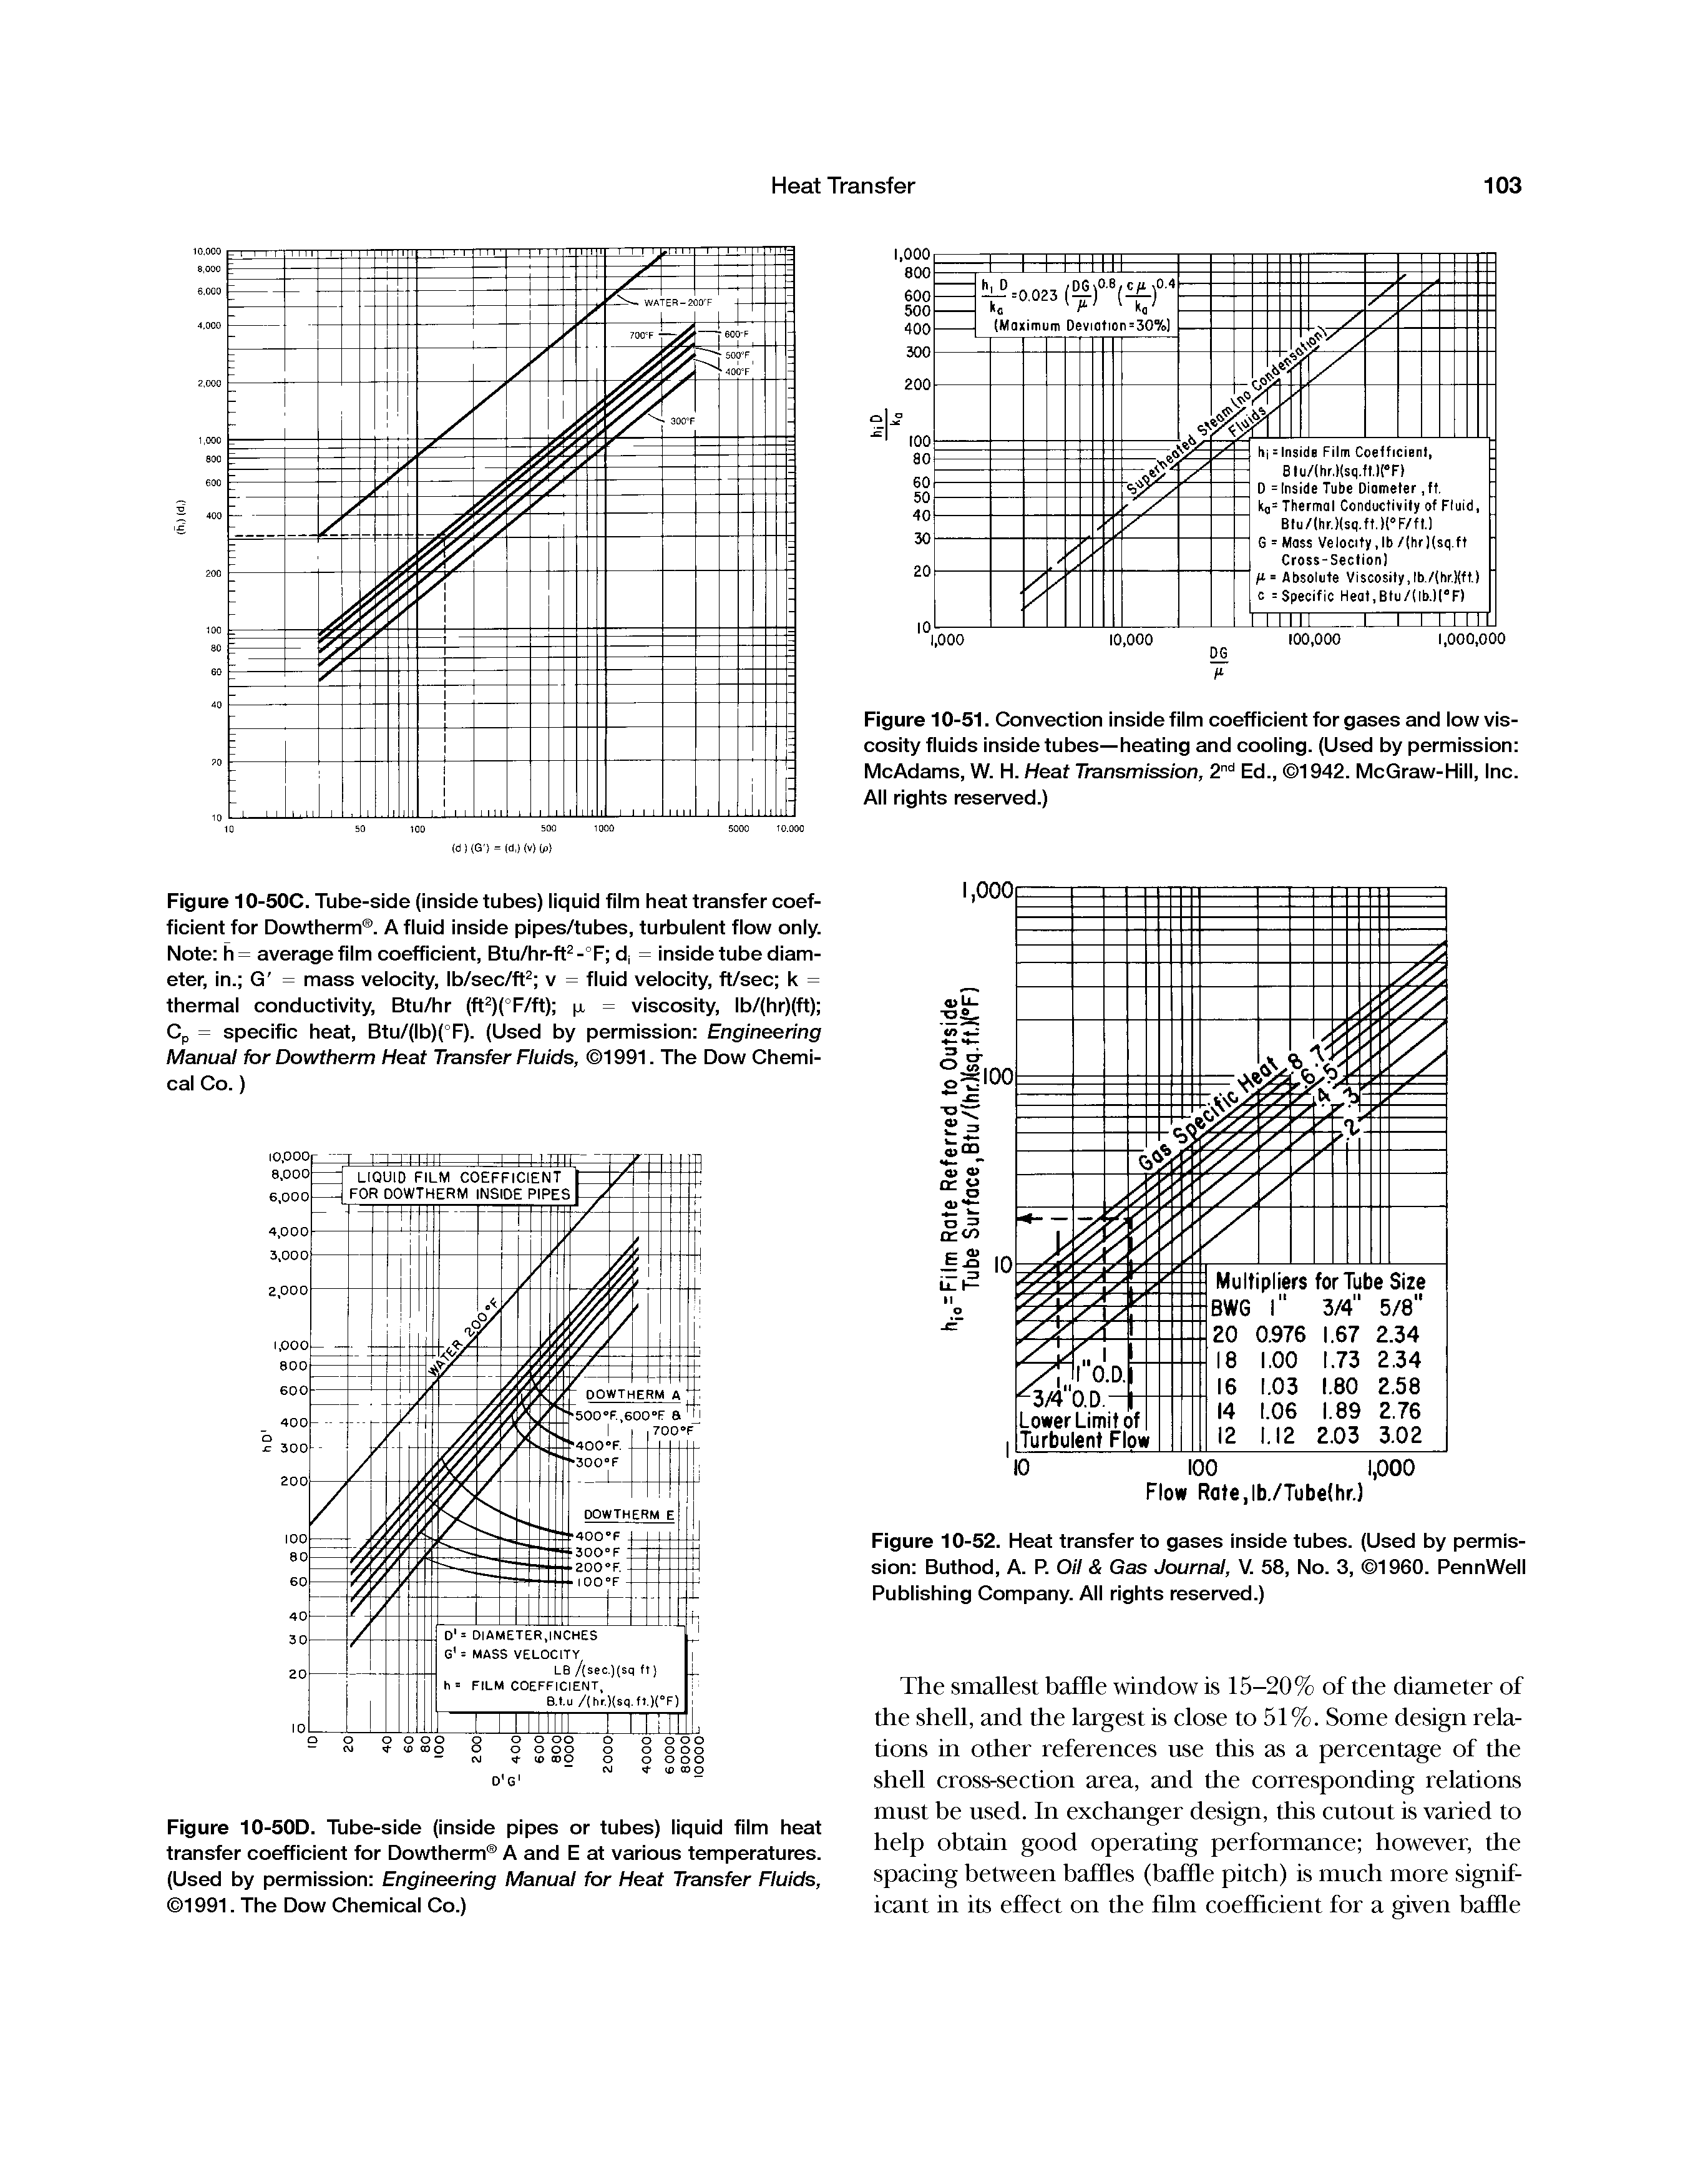 Figure 10-50D. Tube-side (inside pipes or tubes) liquid film heat transfer coefficient for Dowtherm A and E at various temperatures. (Used by permission Engineering Manual for Heat Transfer Fluids, 1991. The Dow Chemical Co.)...